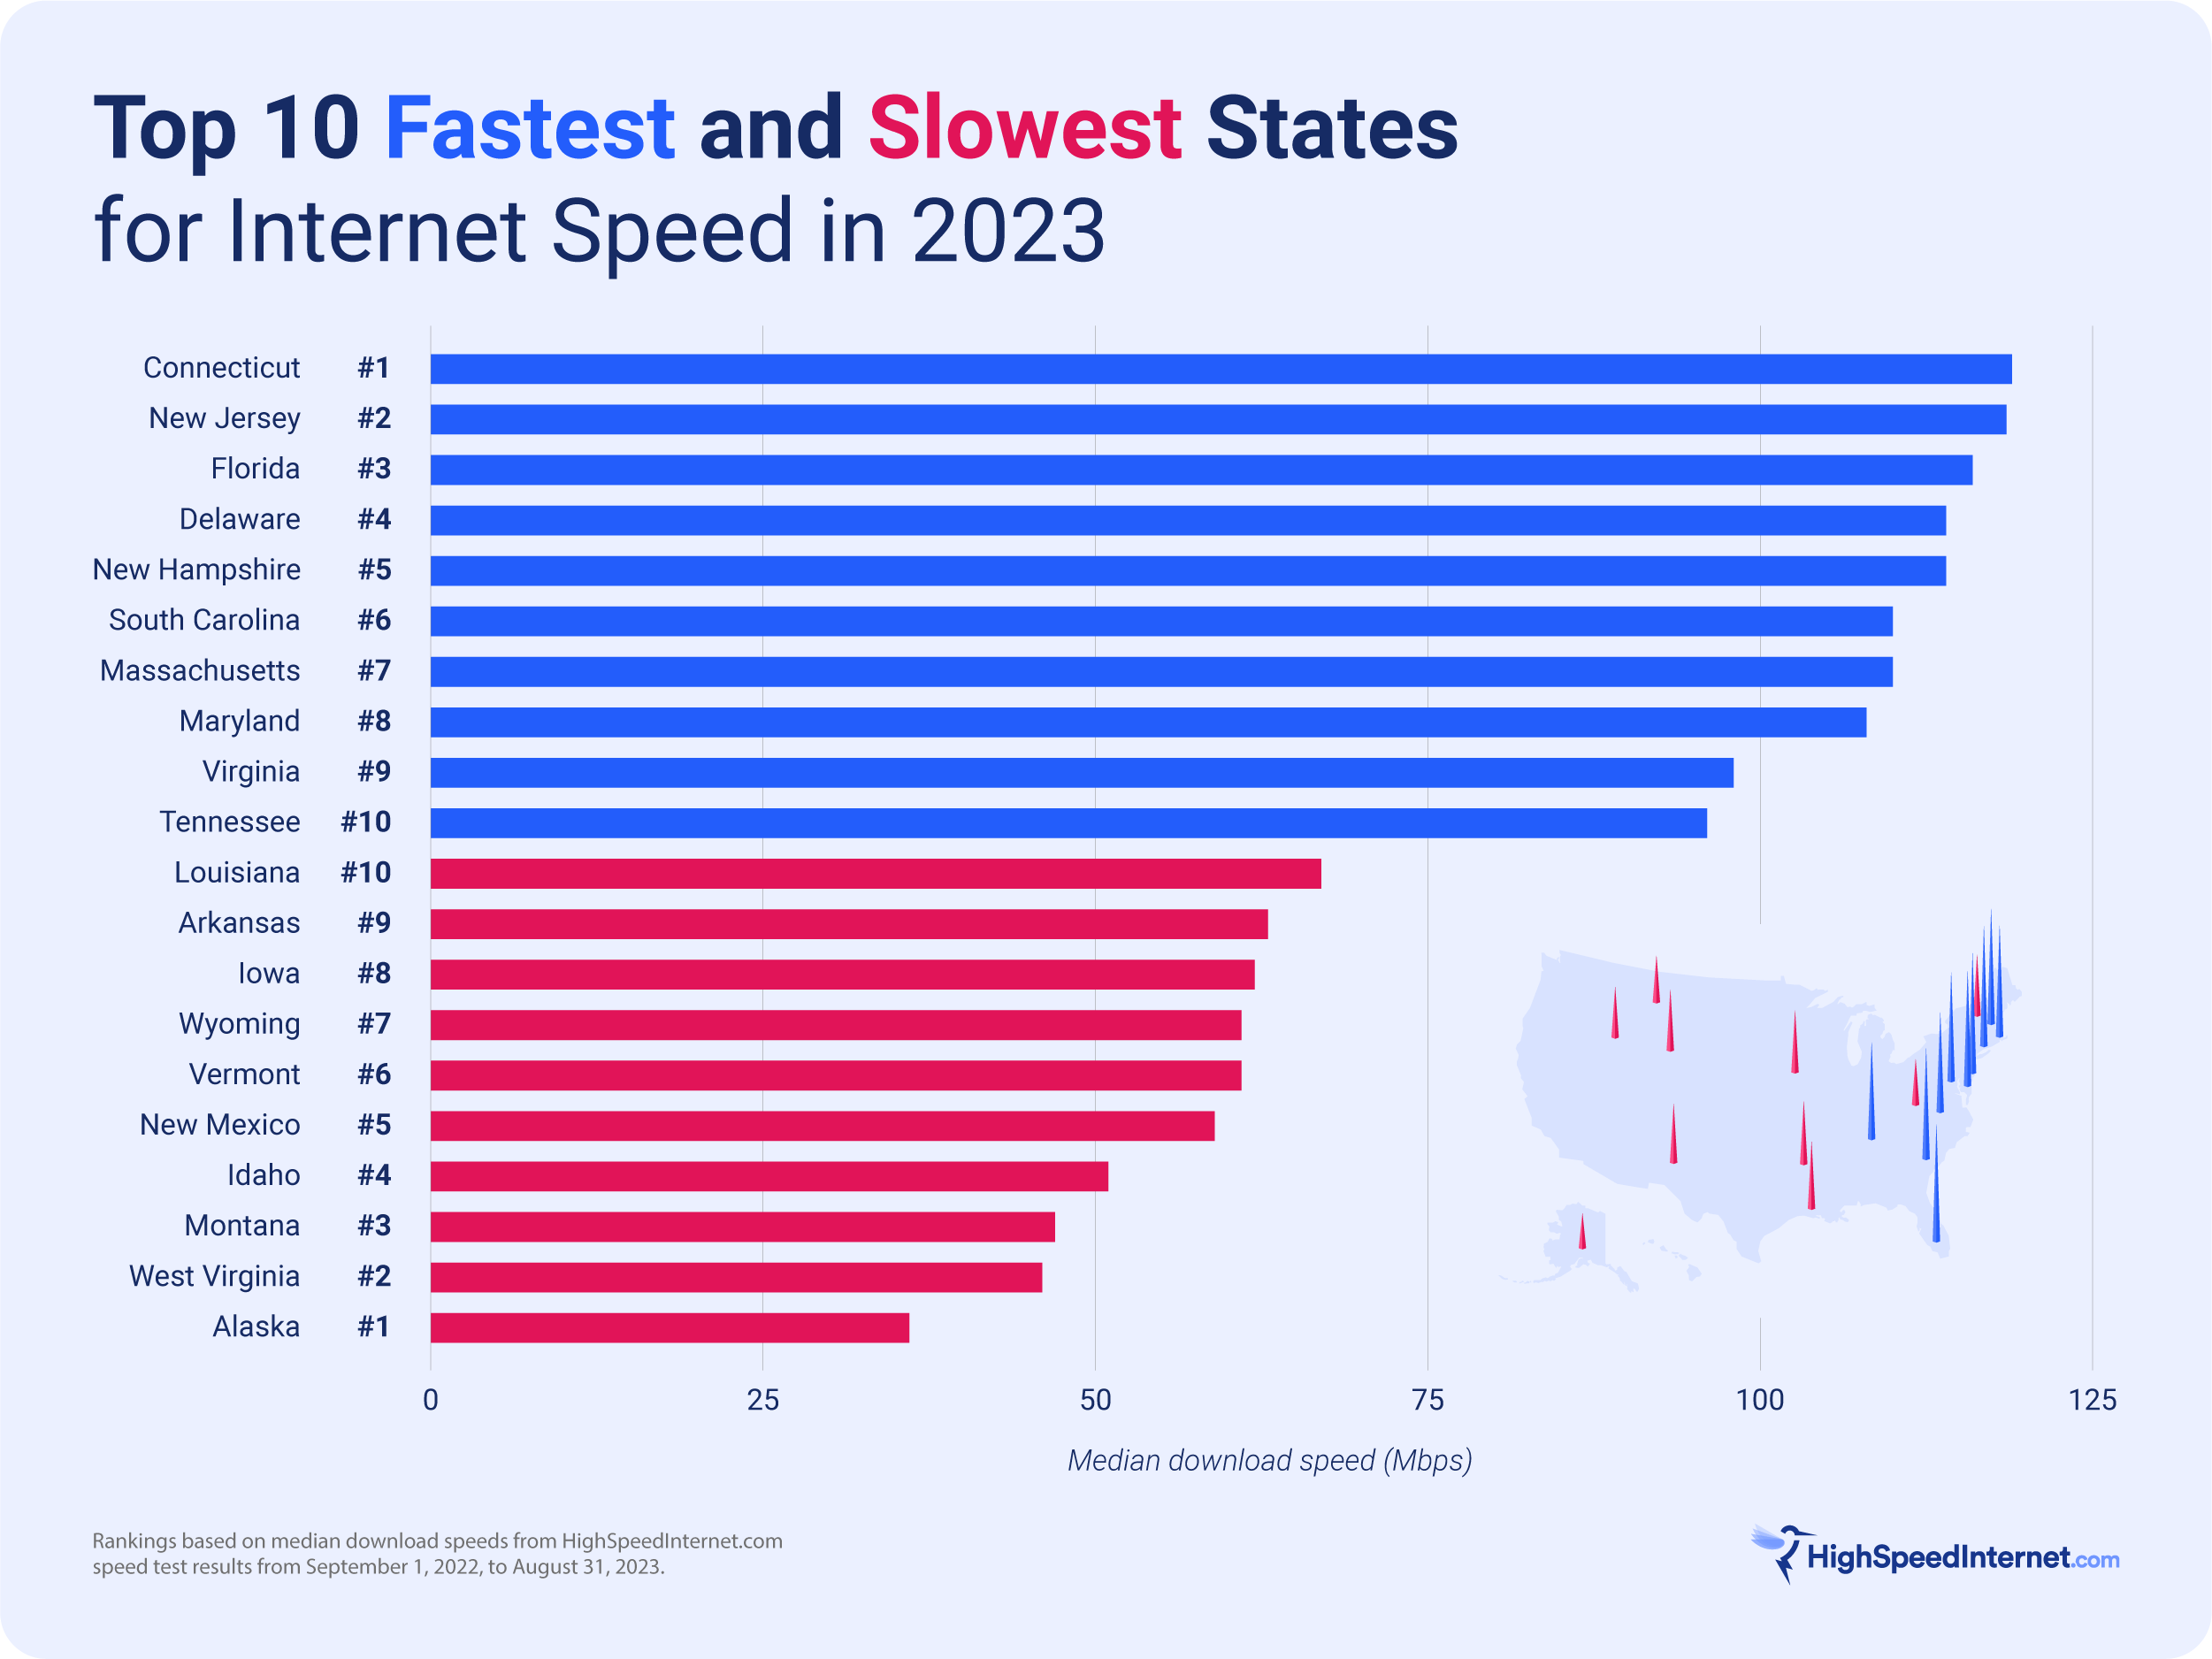 The states with the fastest and slowest internet speeds in the U.S. in 2023 bar chart